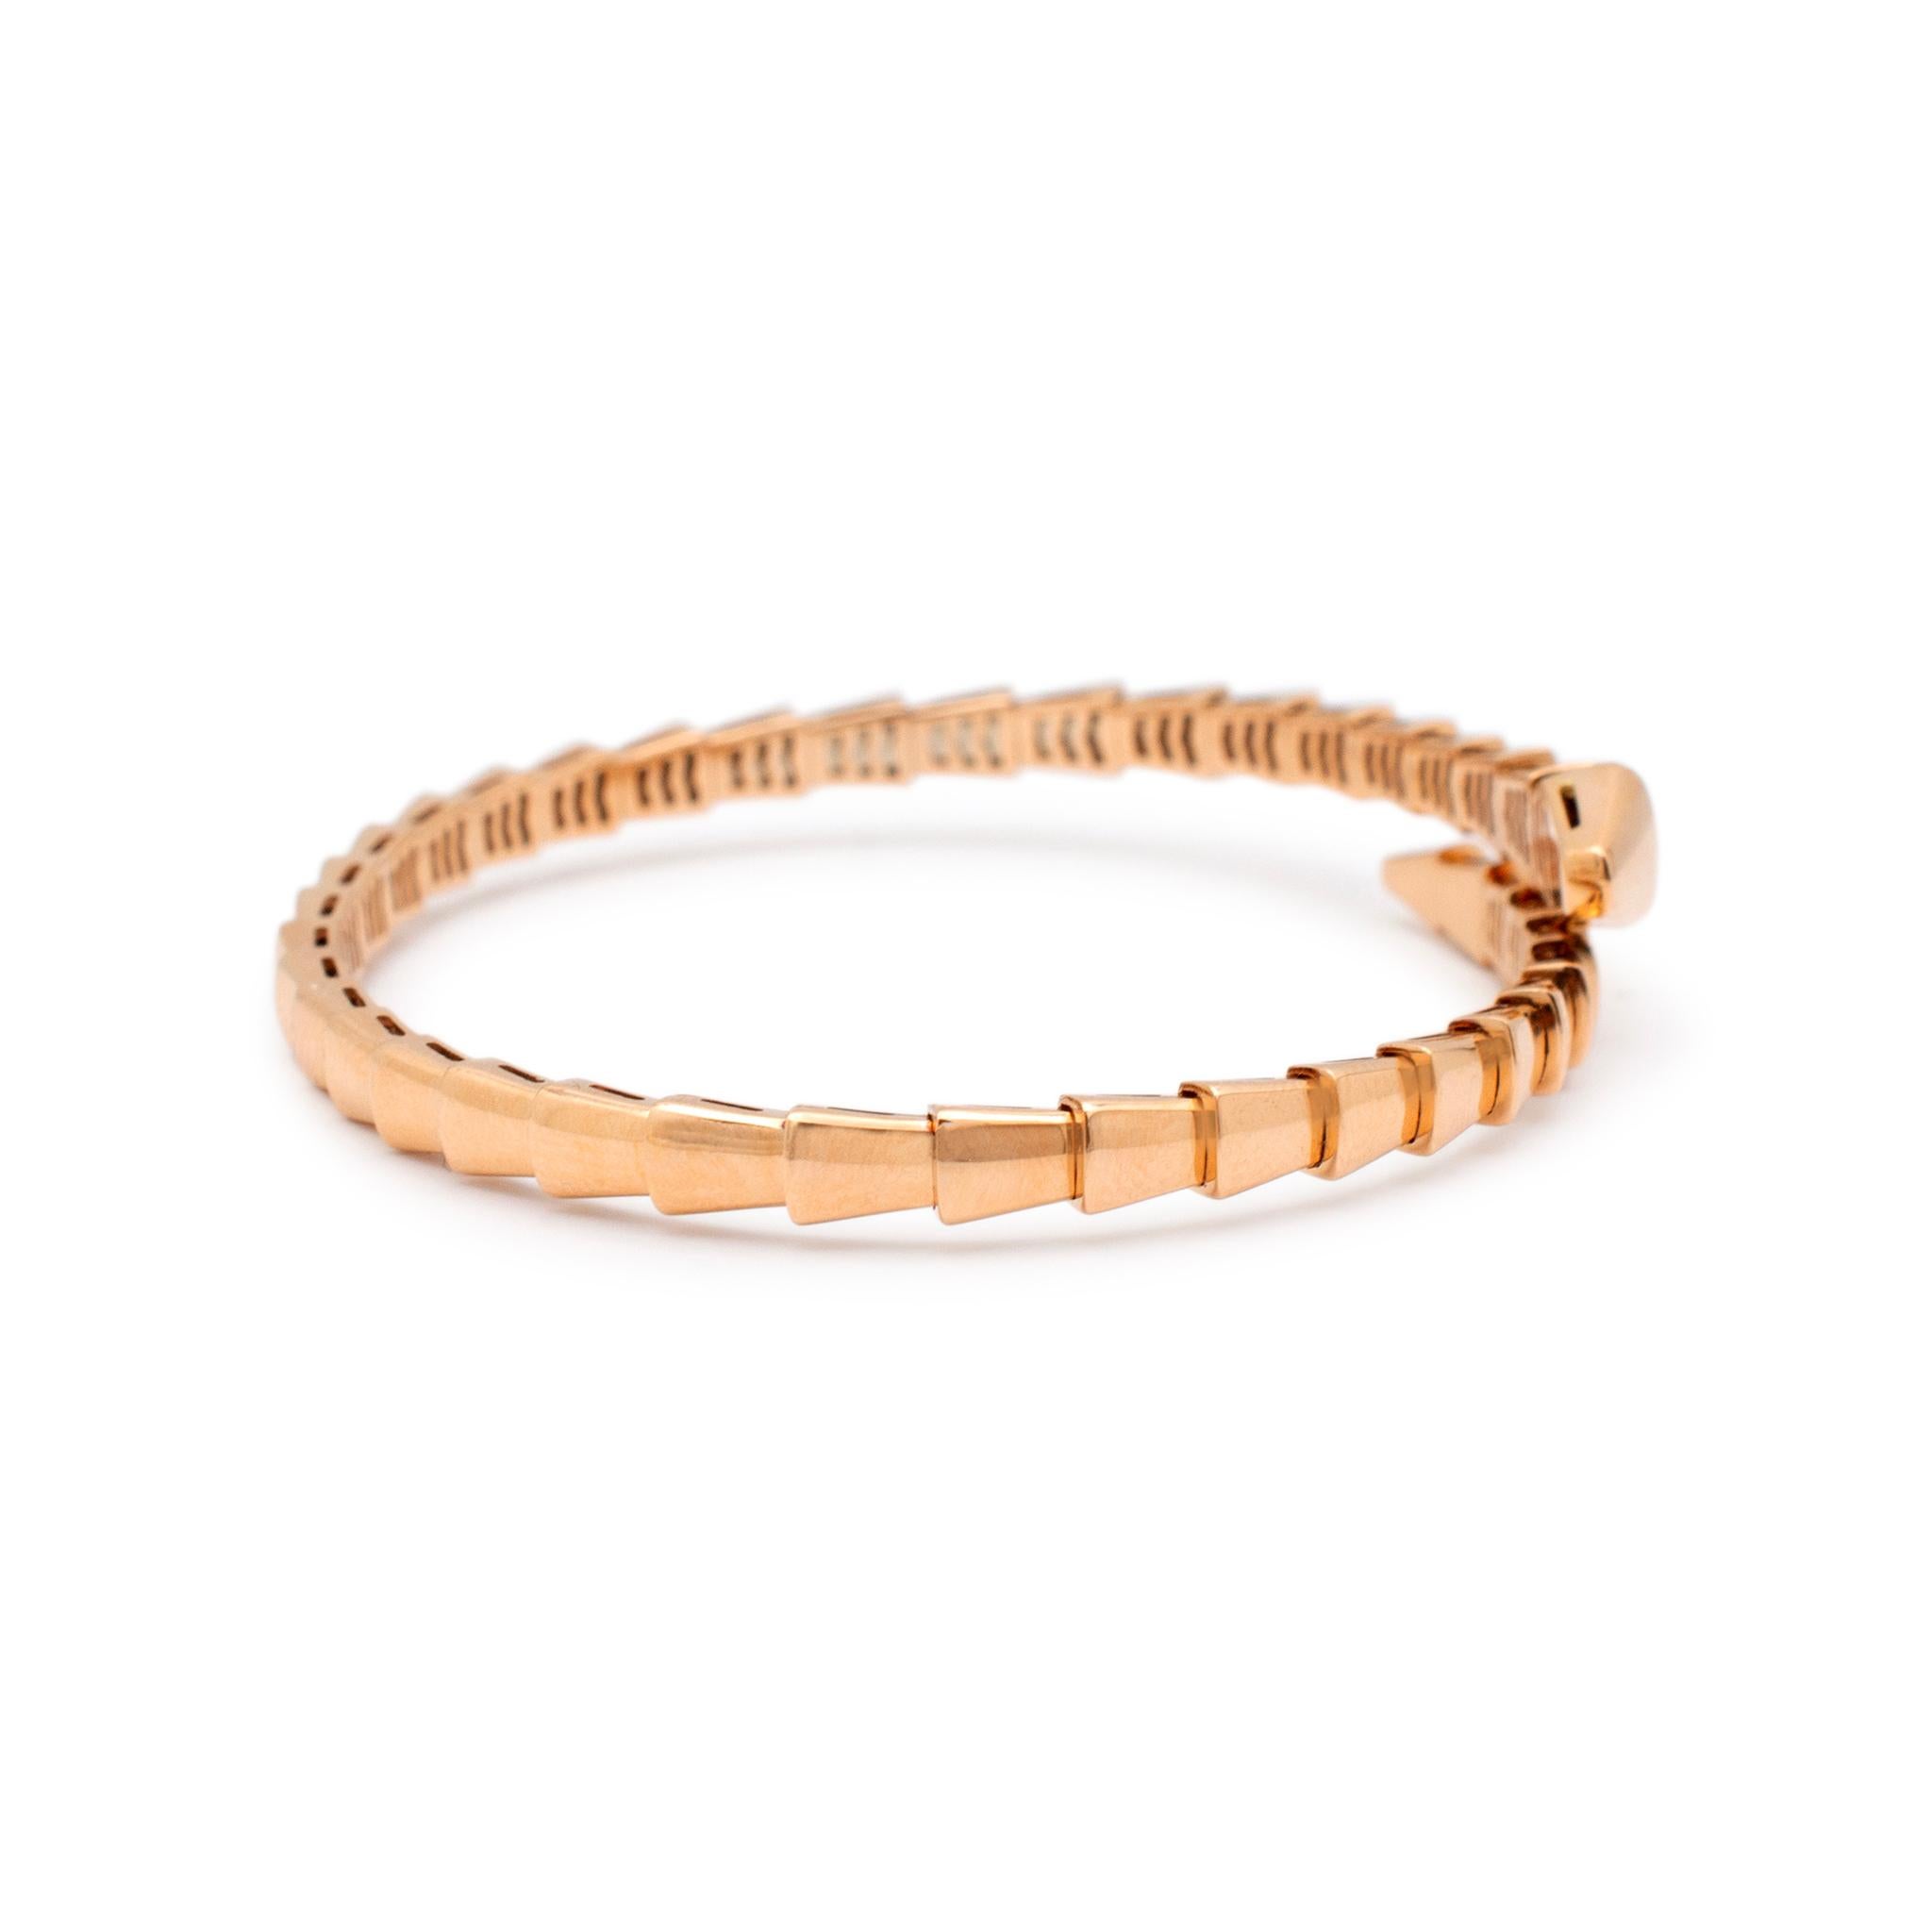 Bvlgari 18K Rose Gold Serpenti Viper Flexible Bangle Bracelet In Excellent Condition For Sale In Houston, TX